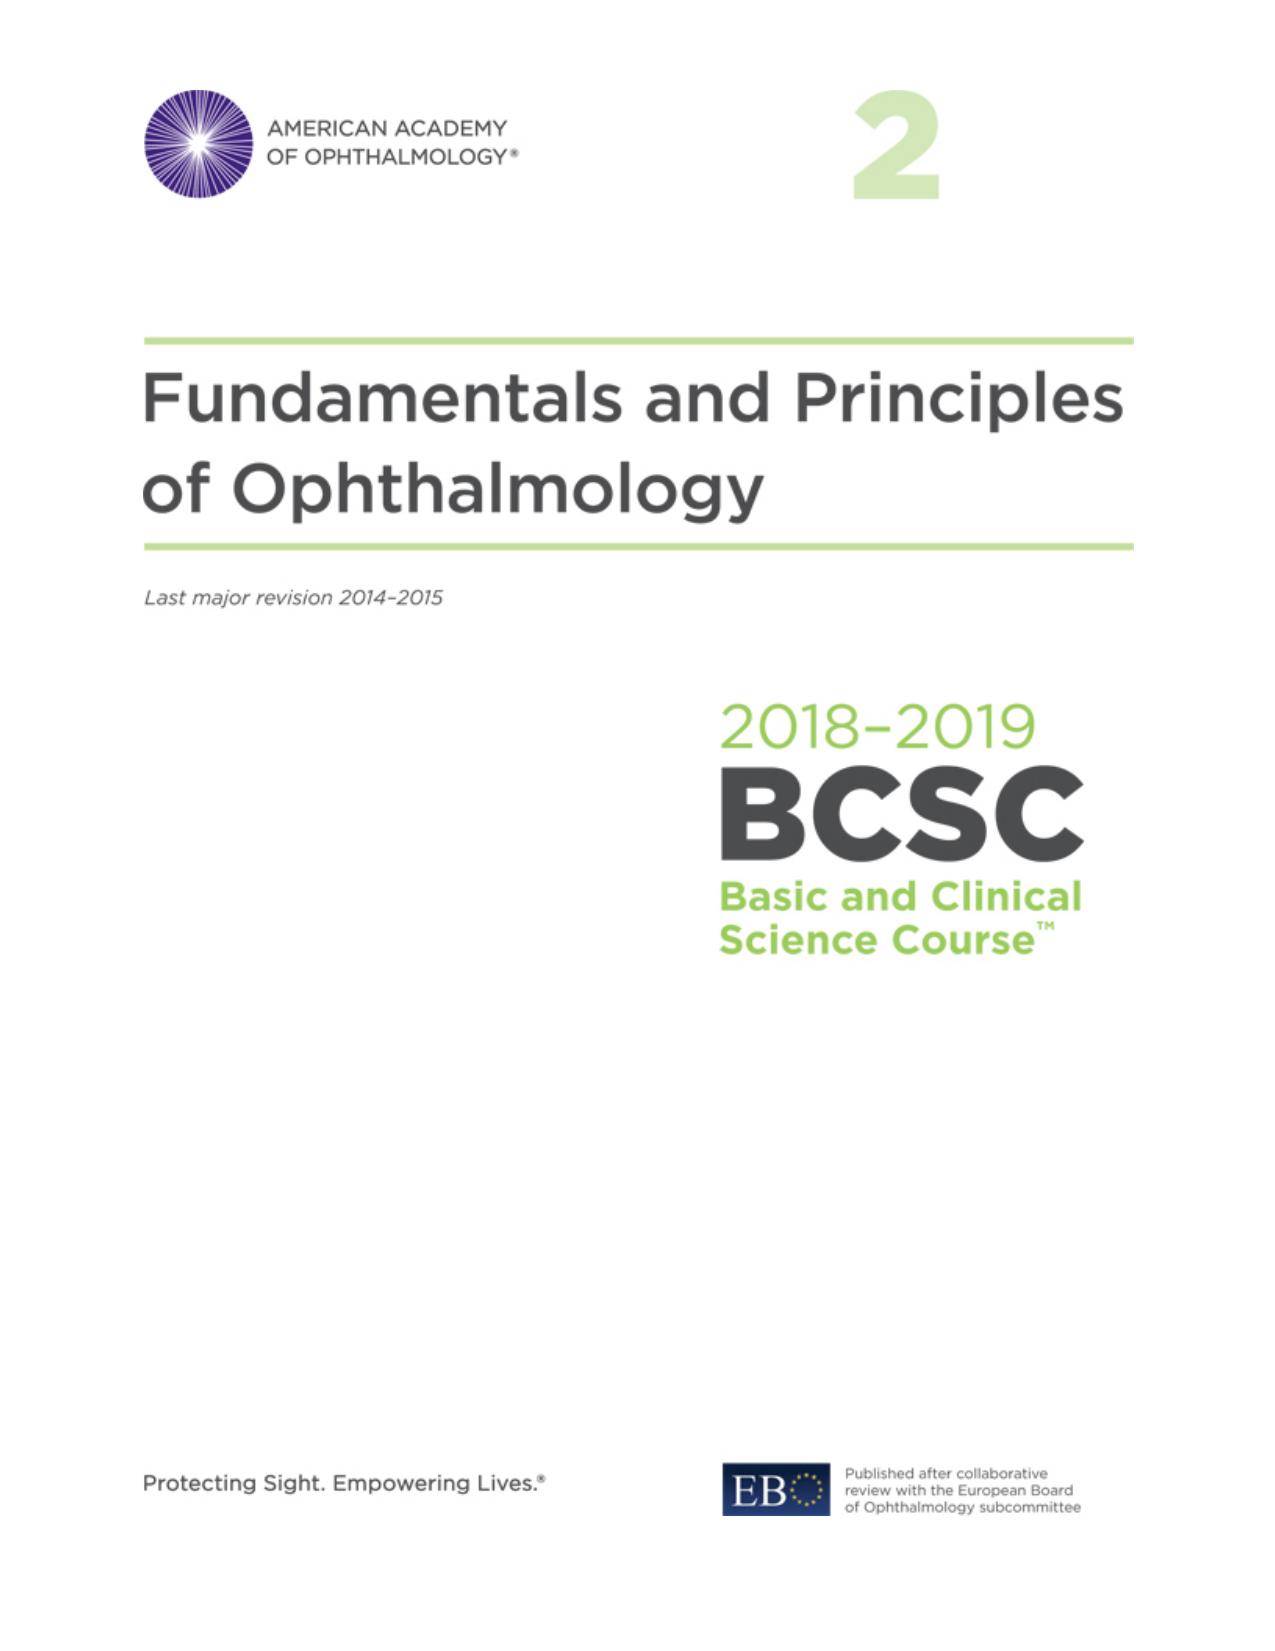 2018-2019 BCSC (Basic and Clinical Science Course), Section 02 Fundamentals and Principles of Ophthalmology.jpg